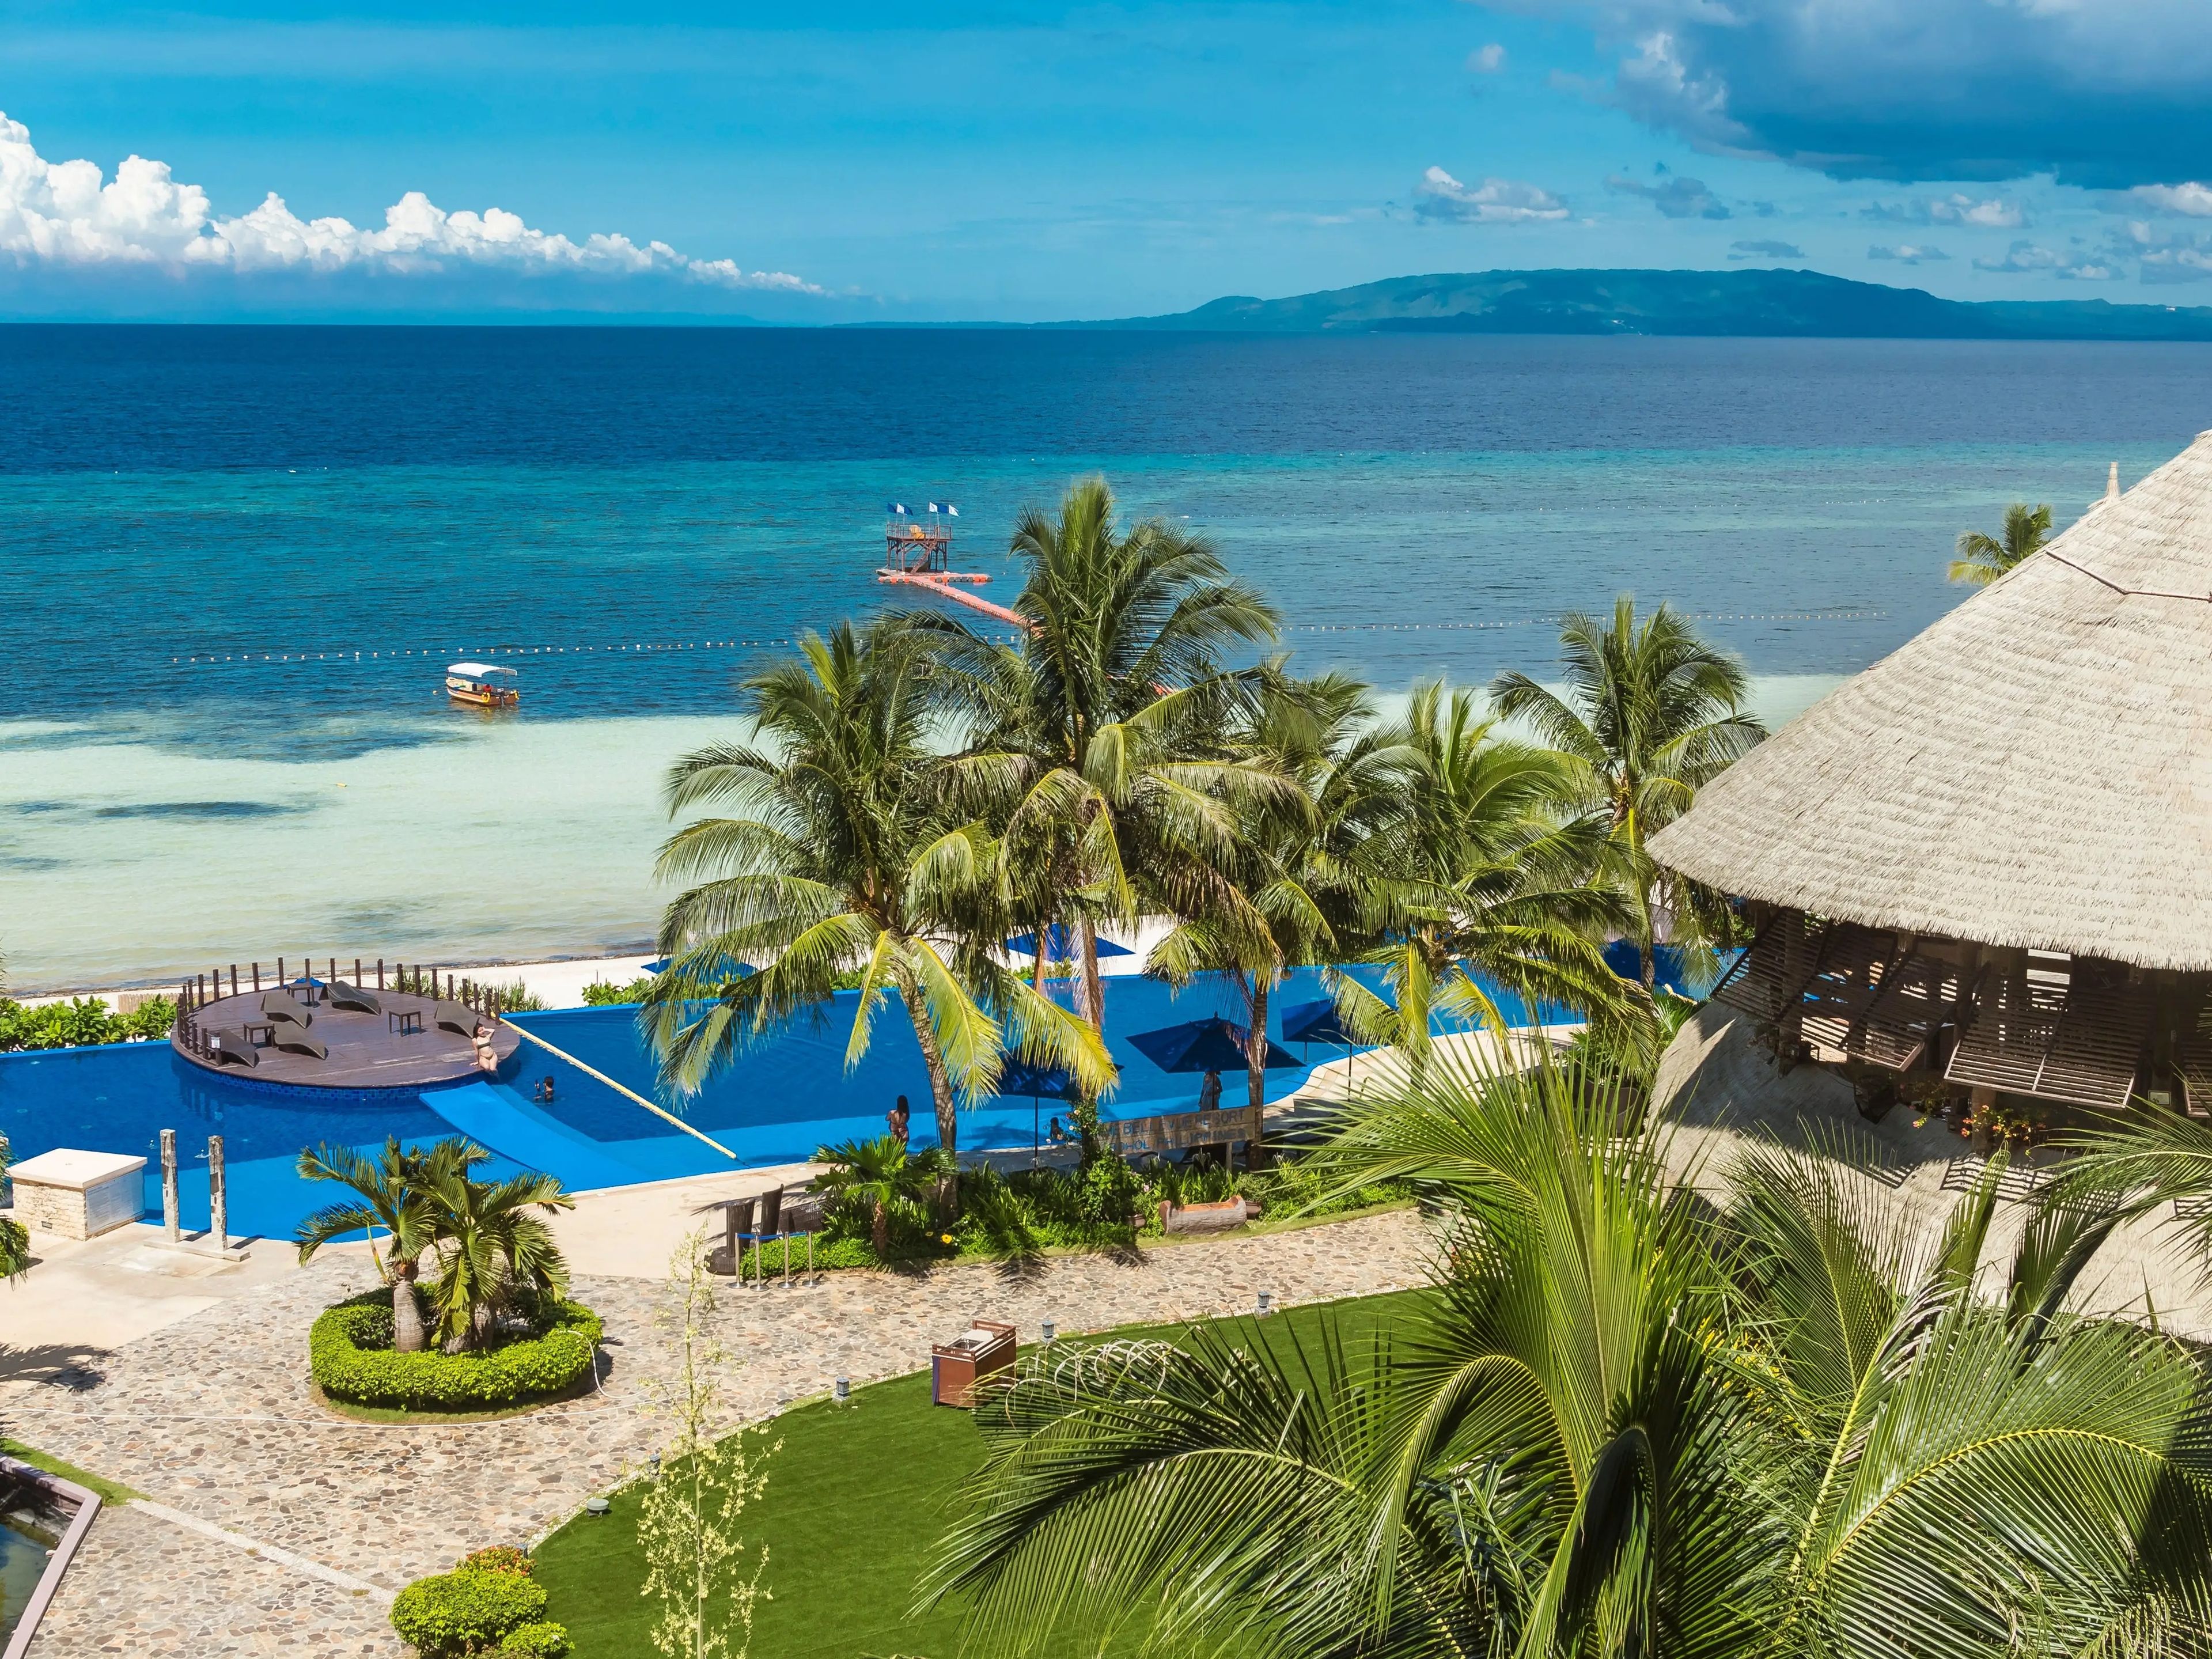 The Bellevue Resort, Bohol, Philippines, "luxury hotels that start at $150 a night"